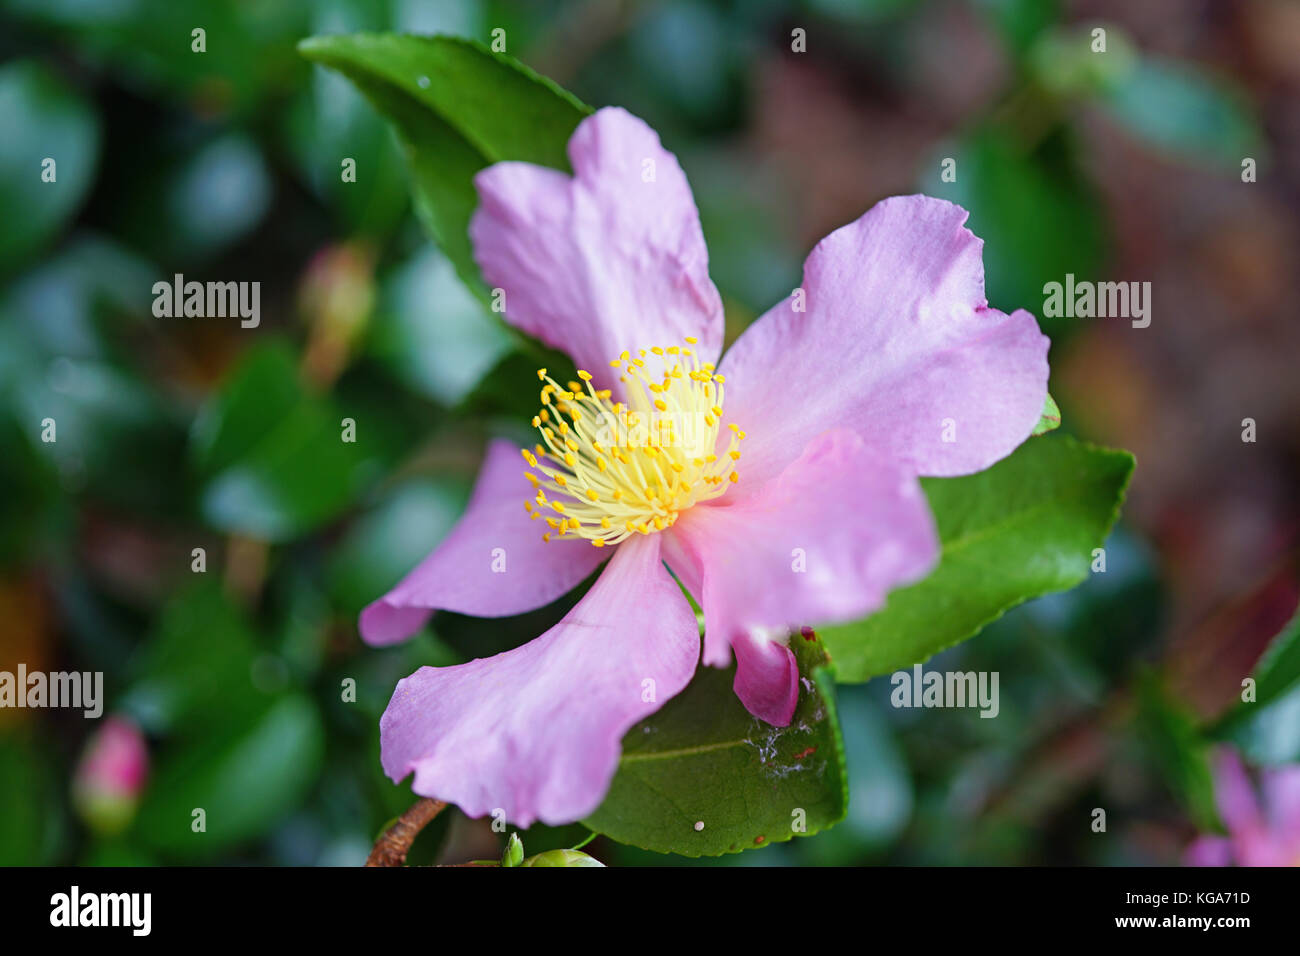 A pink camelia japonica flower in bloom Stock Photo